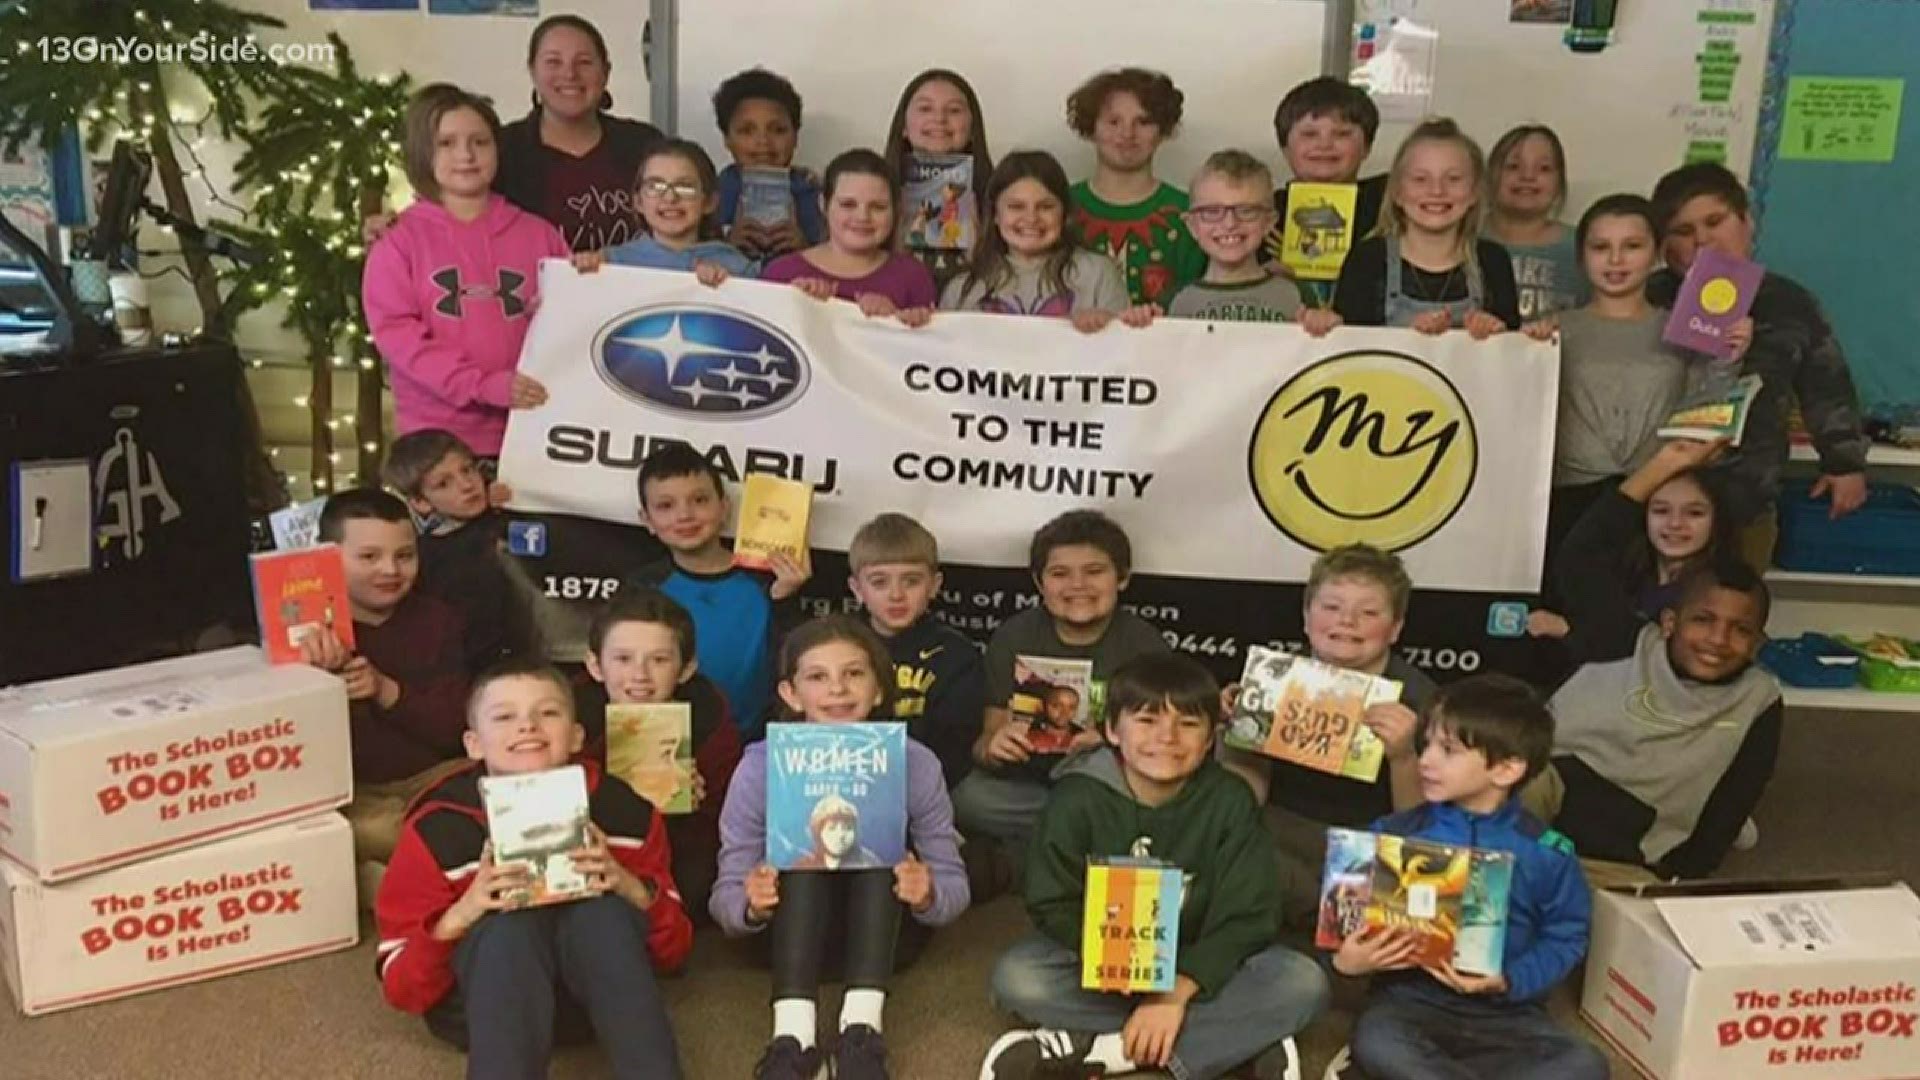 Subaru of Muskegon and The My Auto Group celebrated its Battle of the Books reading competition winners.